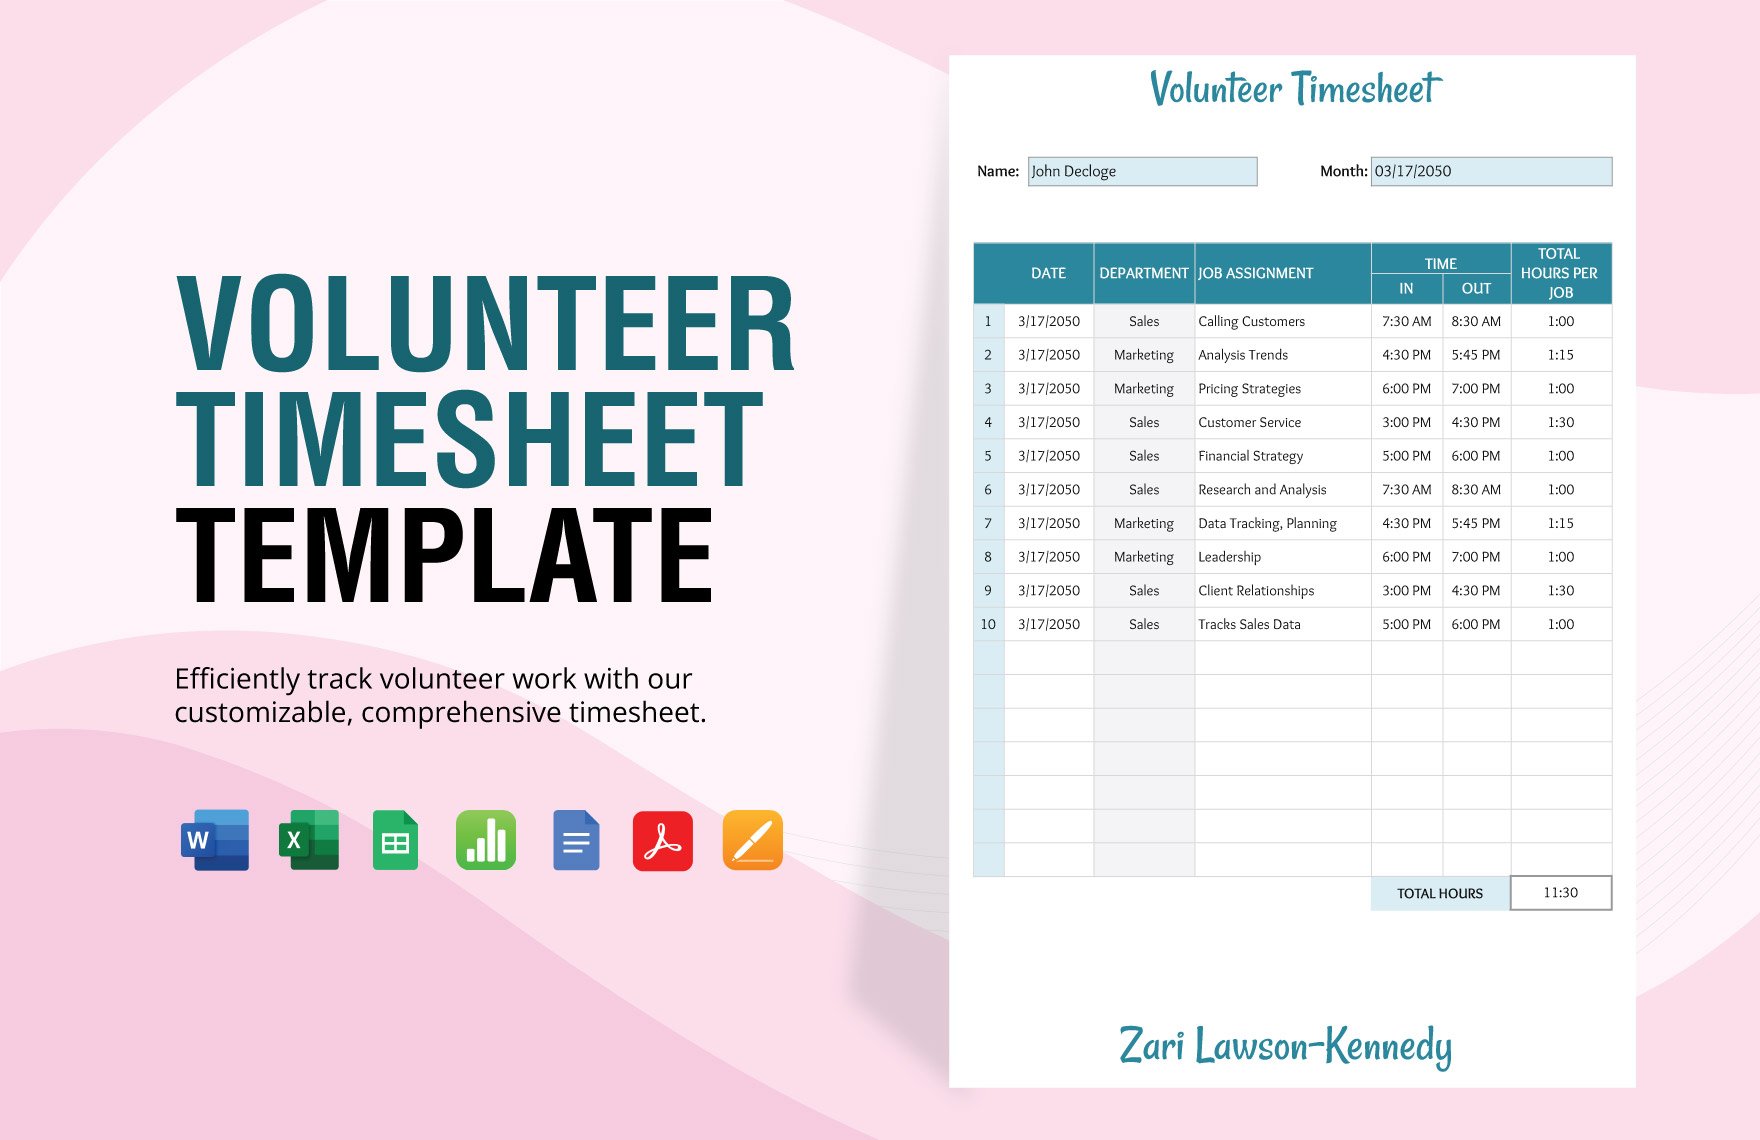 Free Volunteer Timesheet Template in Word, Google Docs, Excel, PDF, Google Sheets, Apple Pages, Apple Numbers